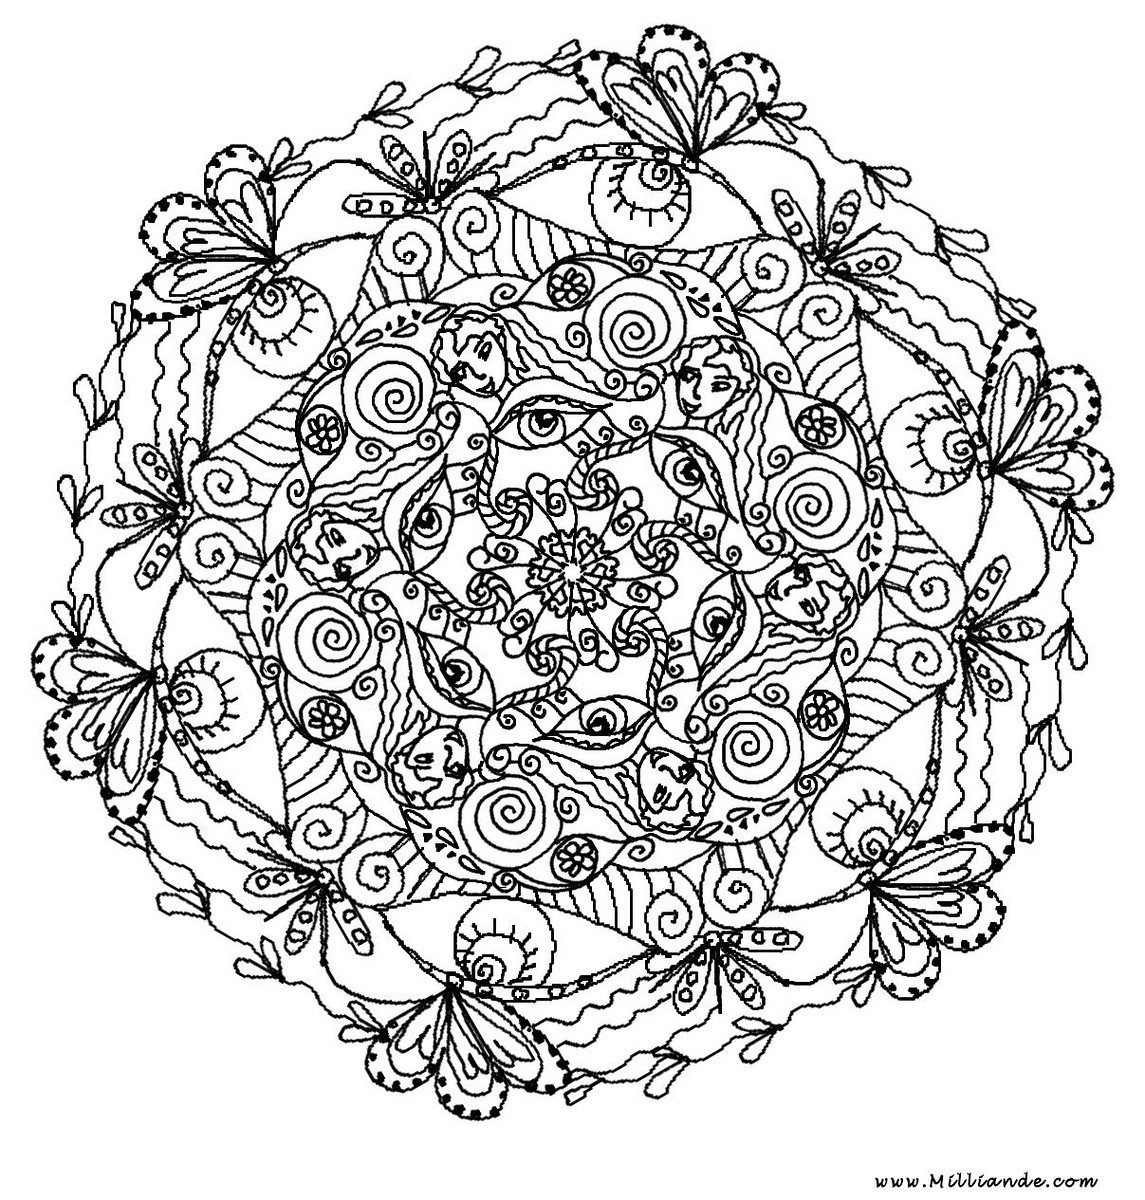 Free Coloring Pages For Adults Mandala
 Mindful Mandalas – juste etre just be